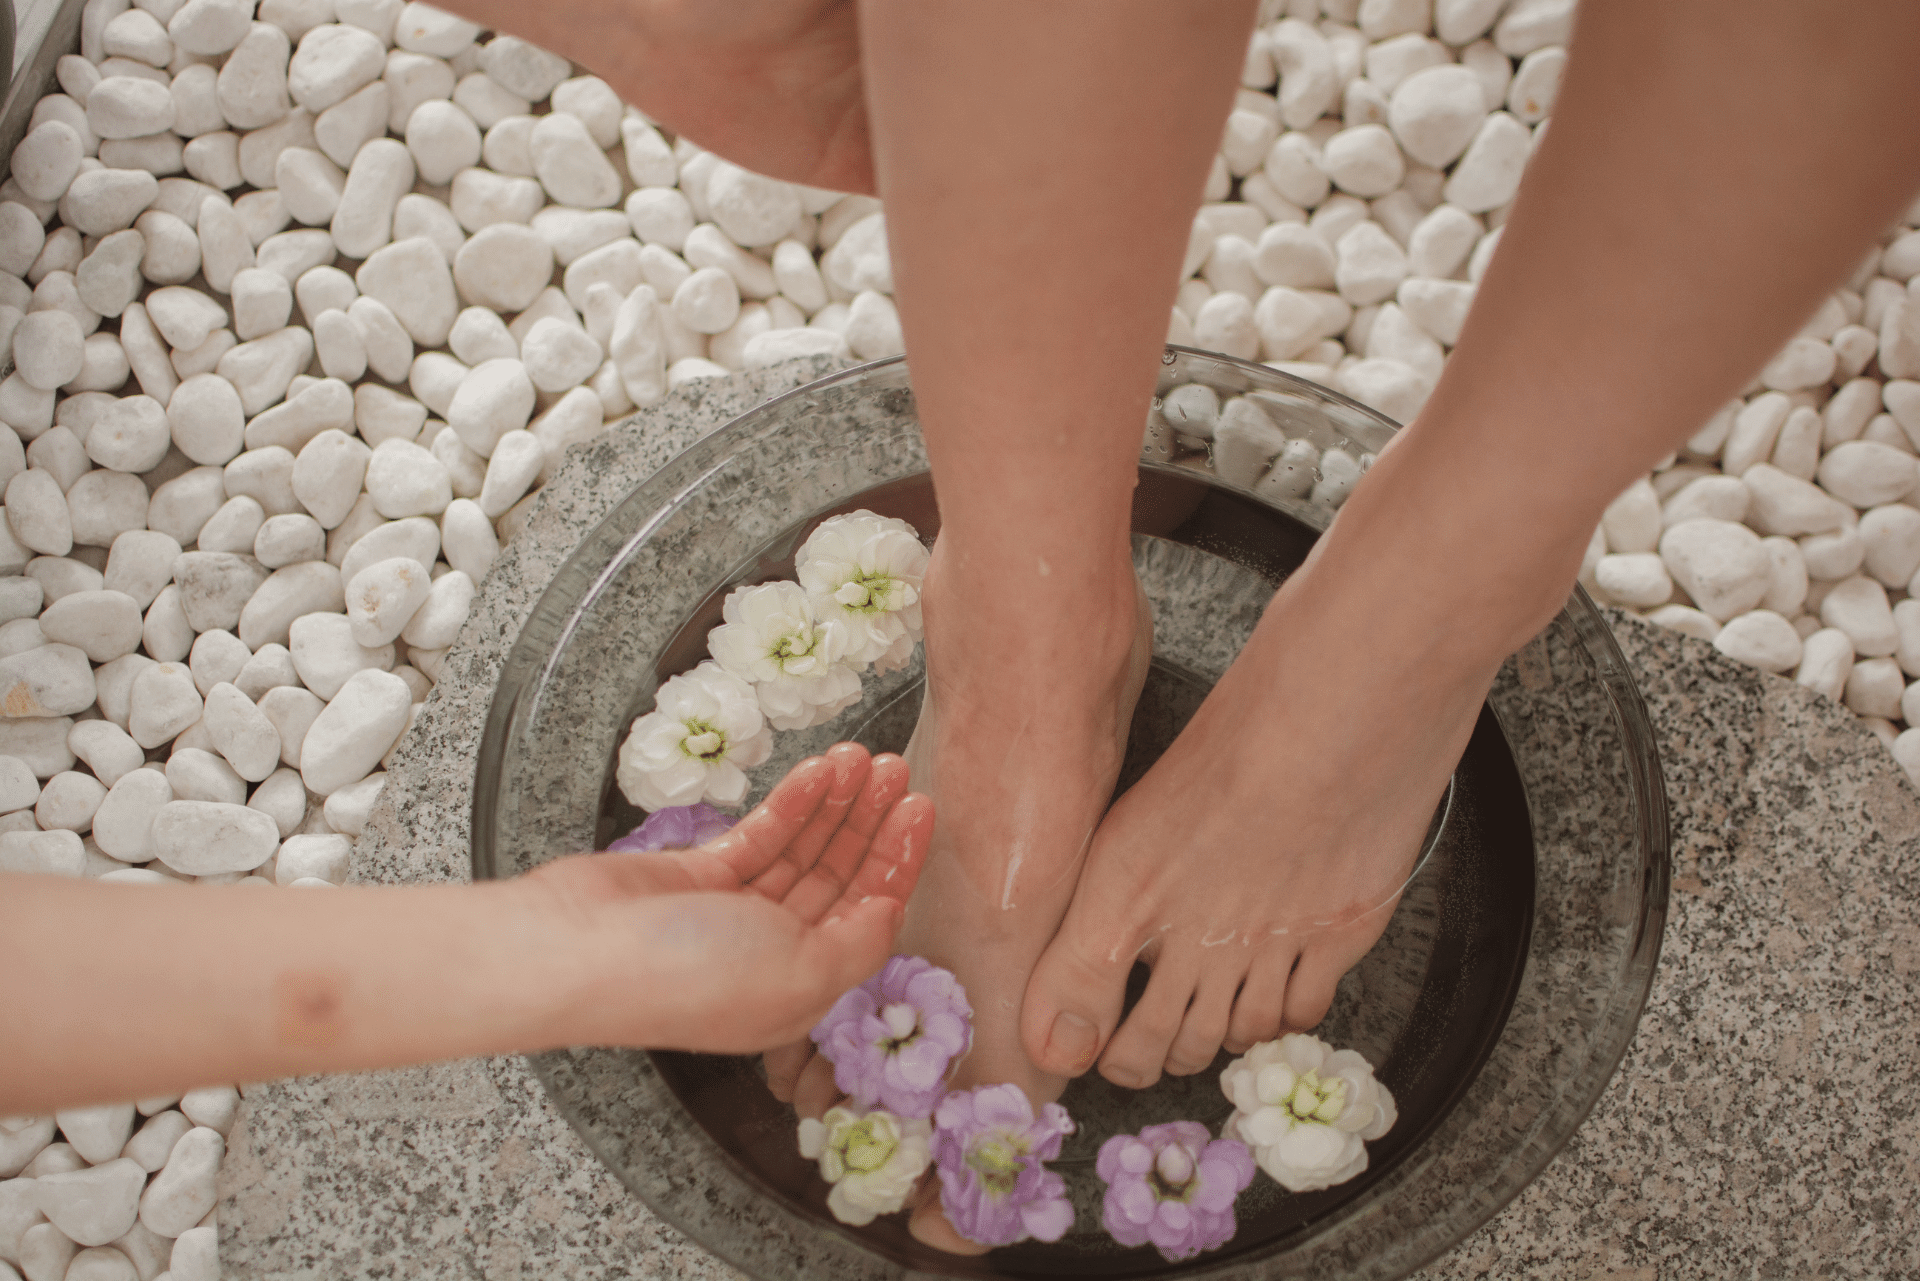 magnesium foot soak from The Healing Body